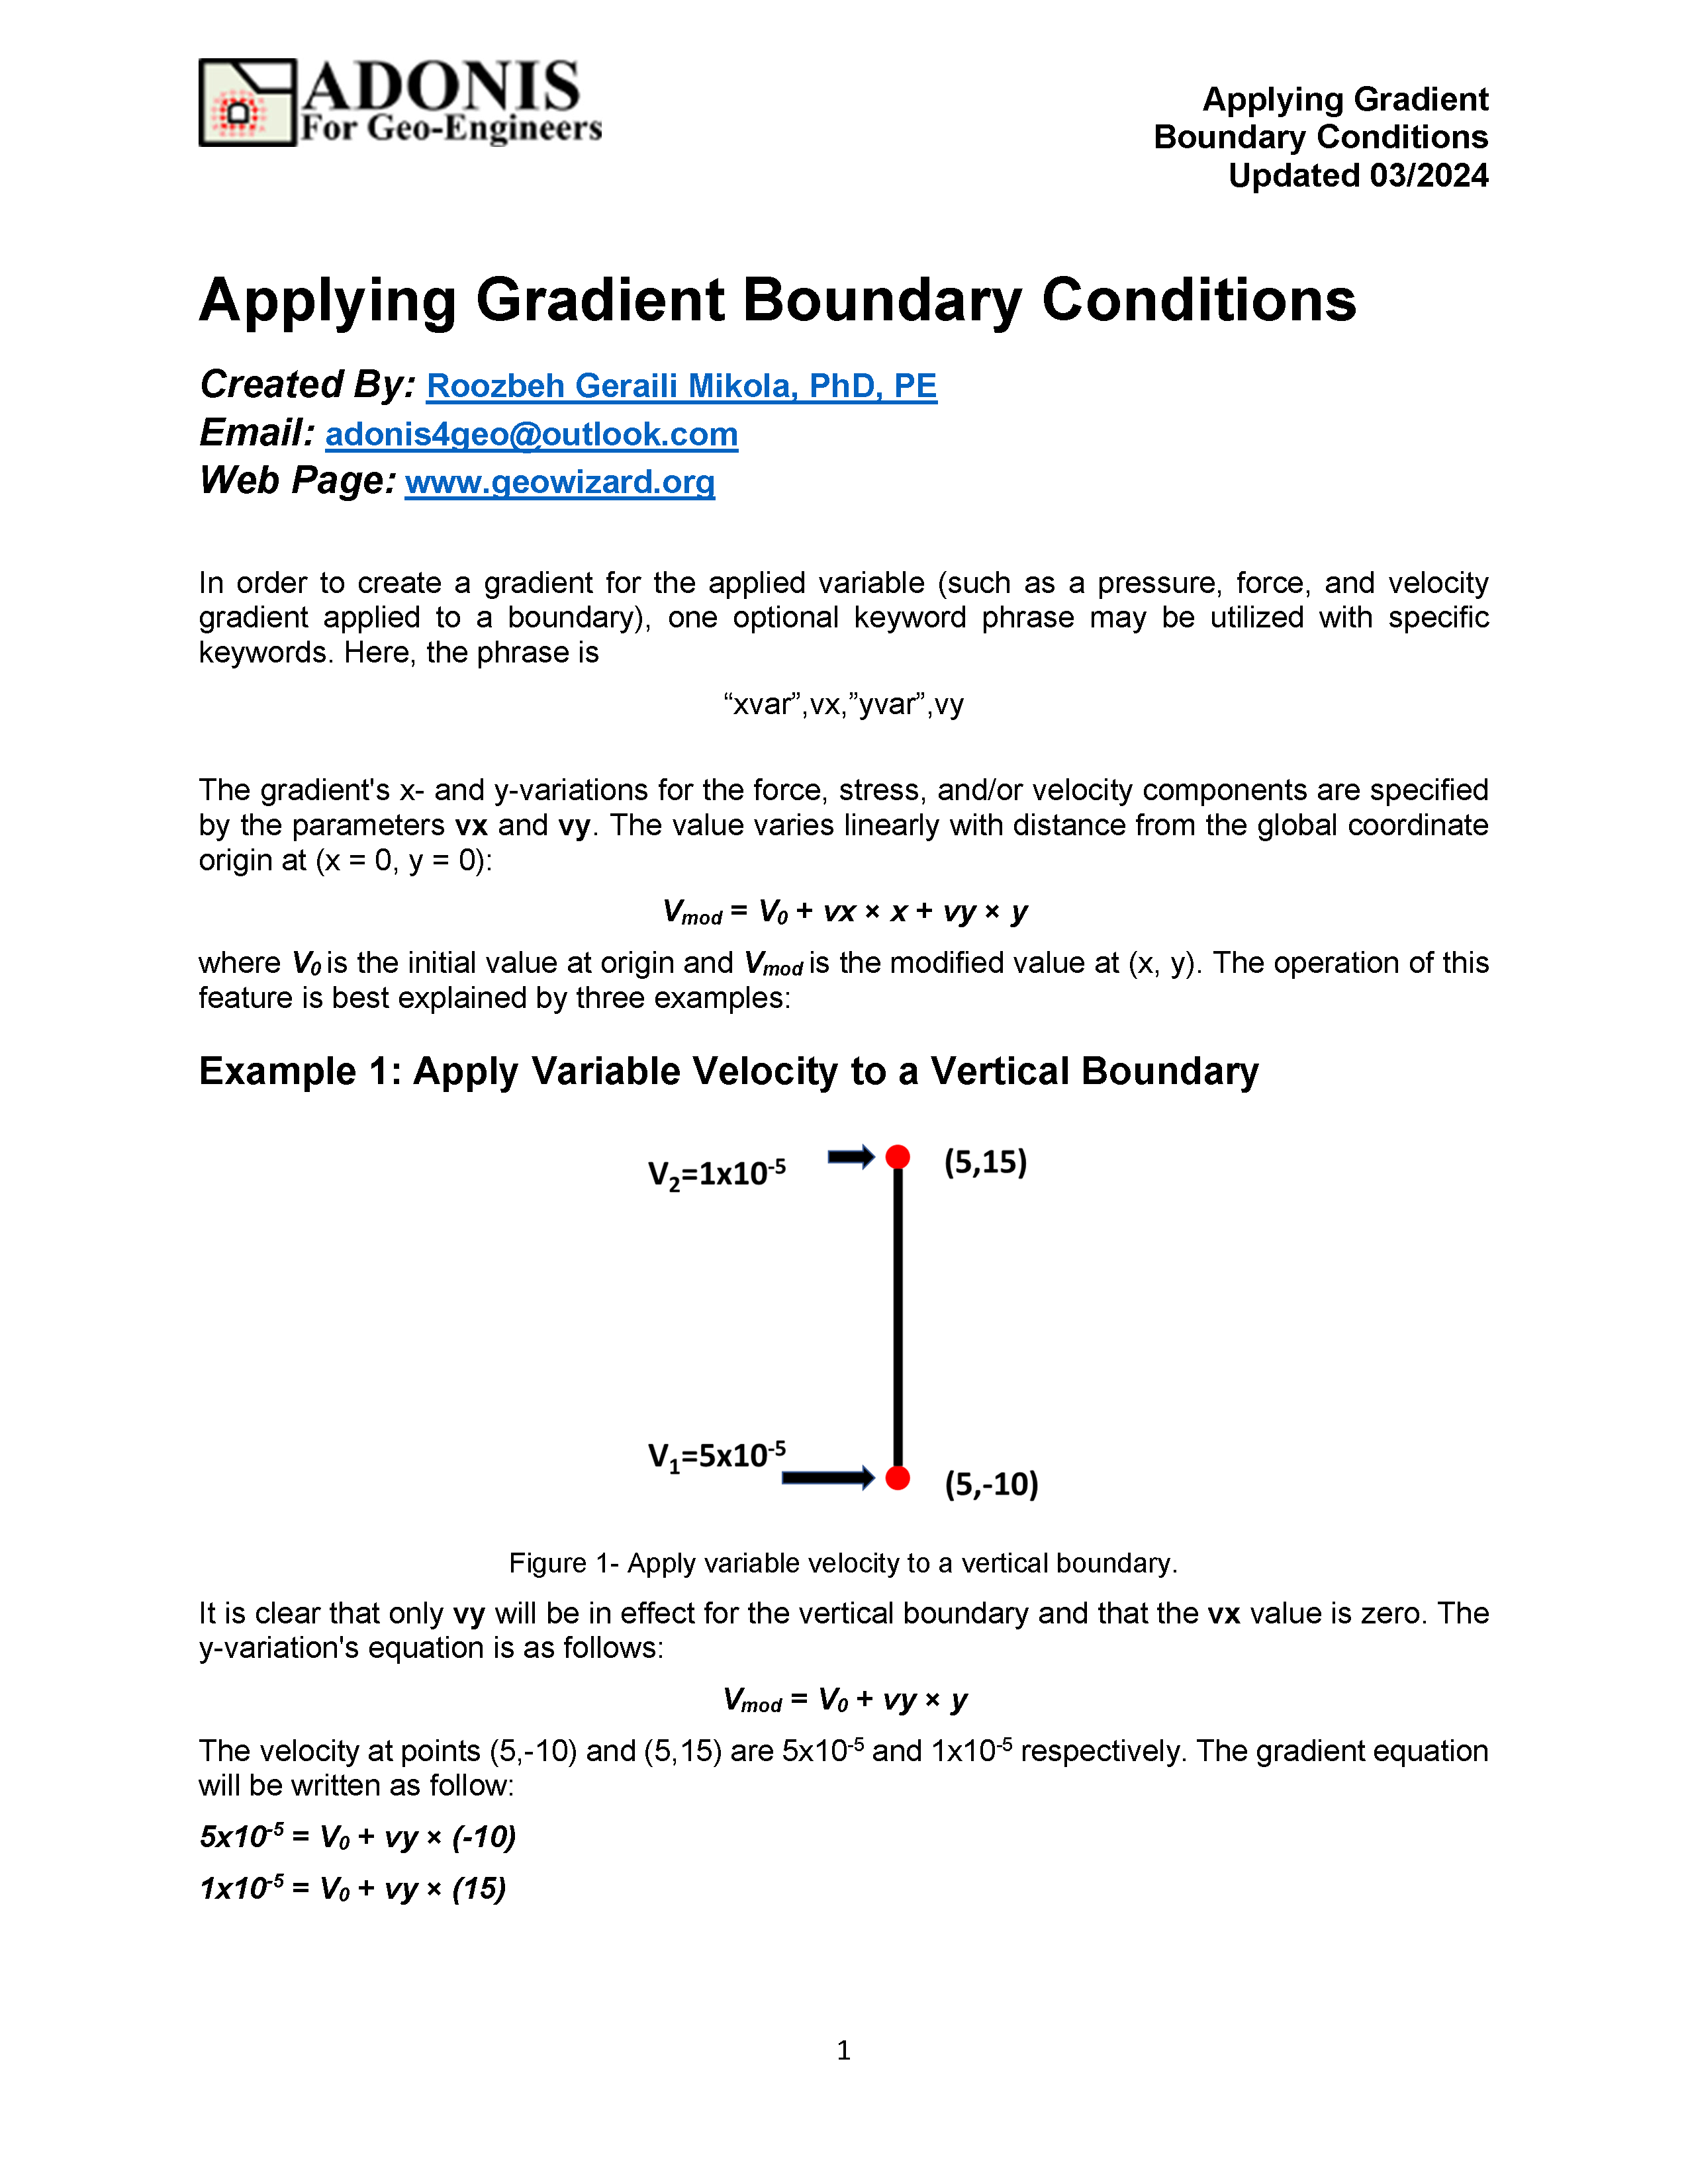 Applying Gradient Boundary Conditions